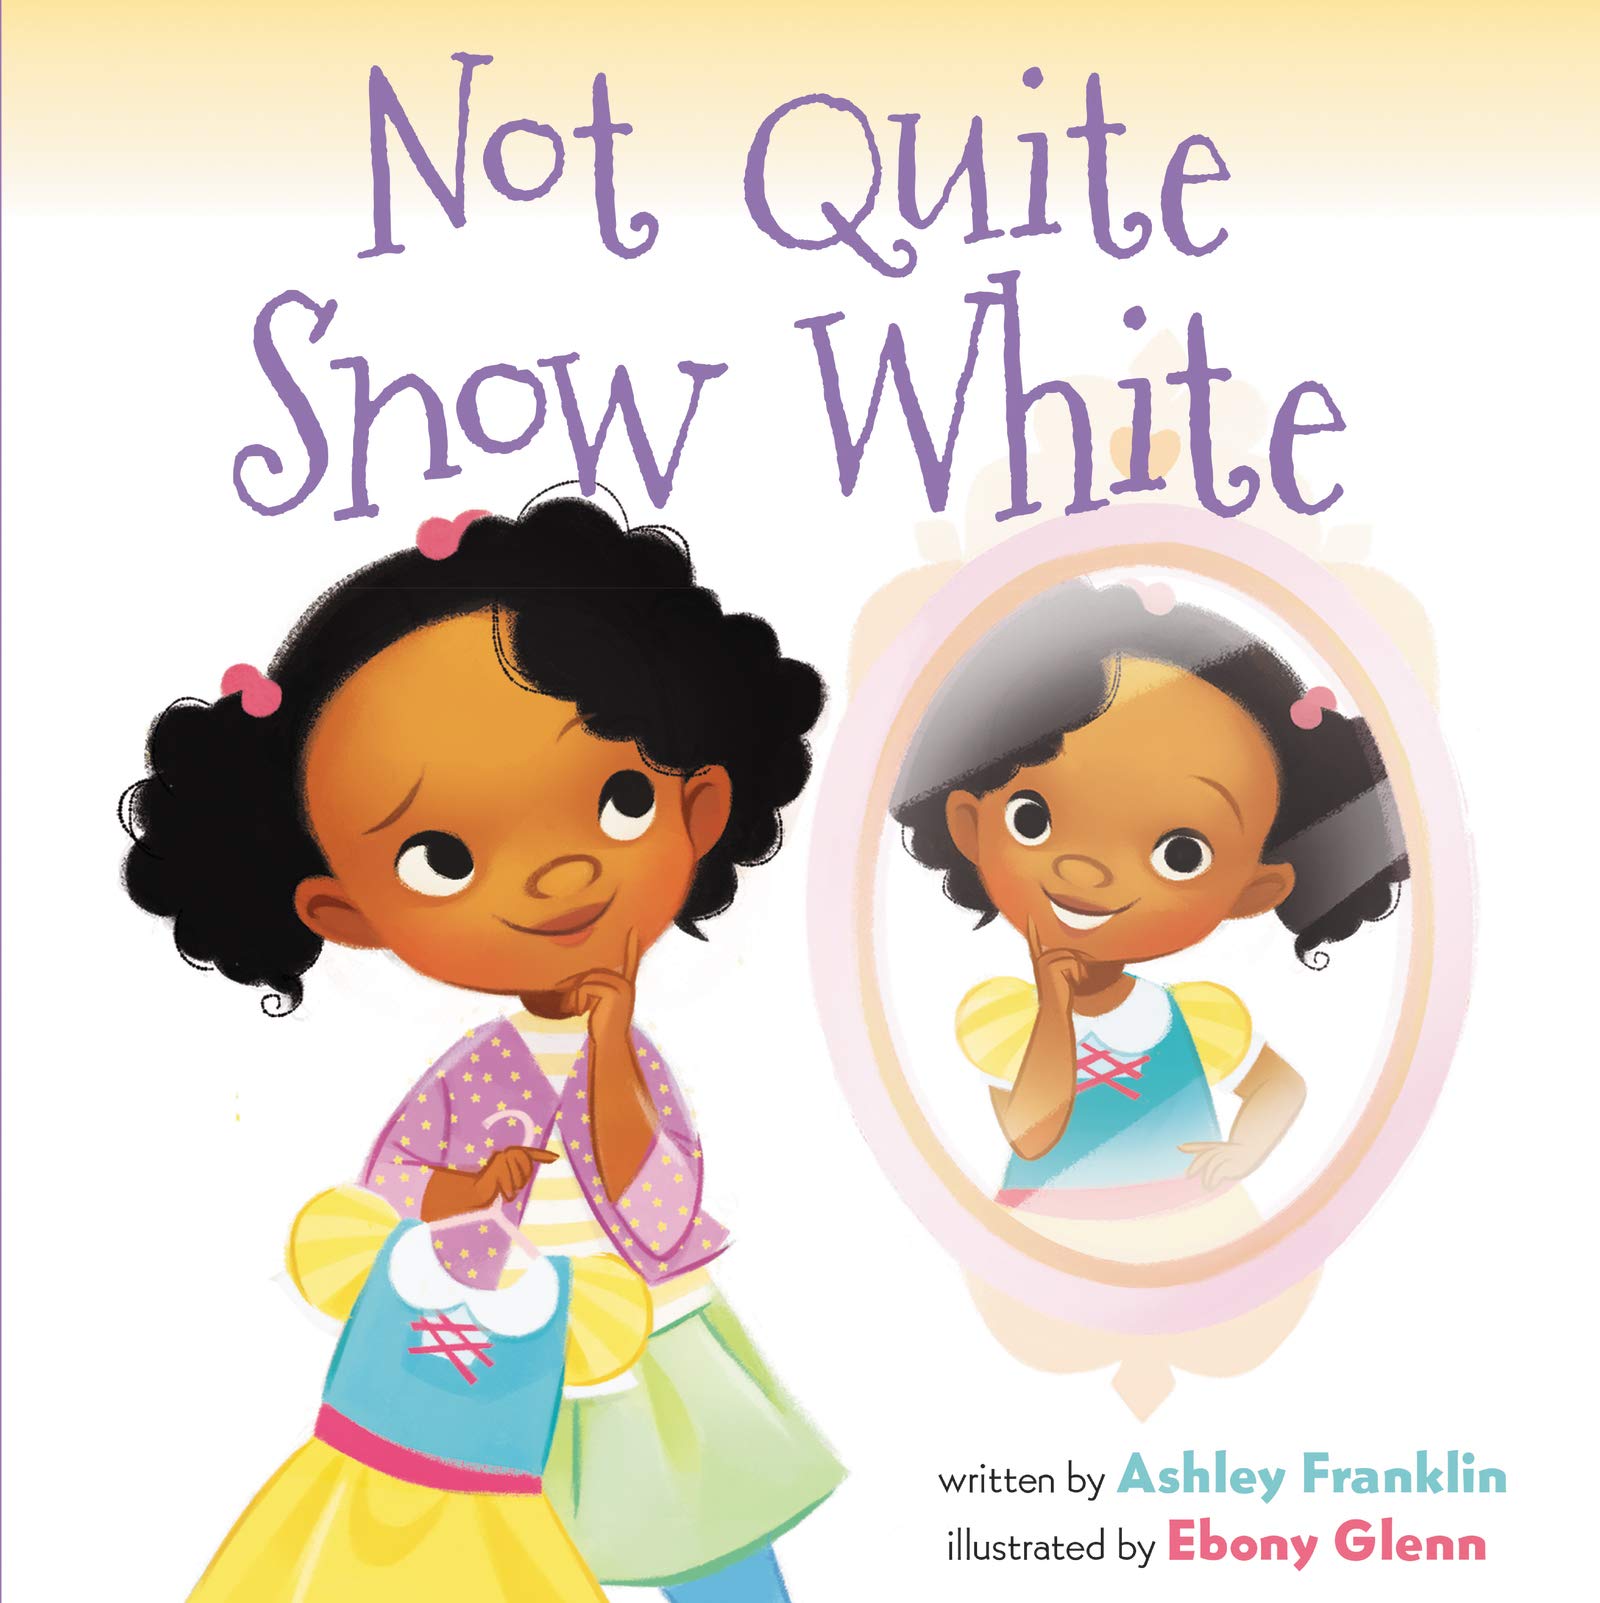 Book Cover of Not Quite Snow White by Ashley Franklin